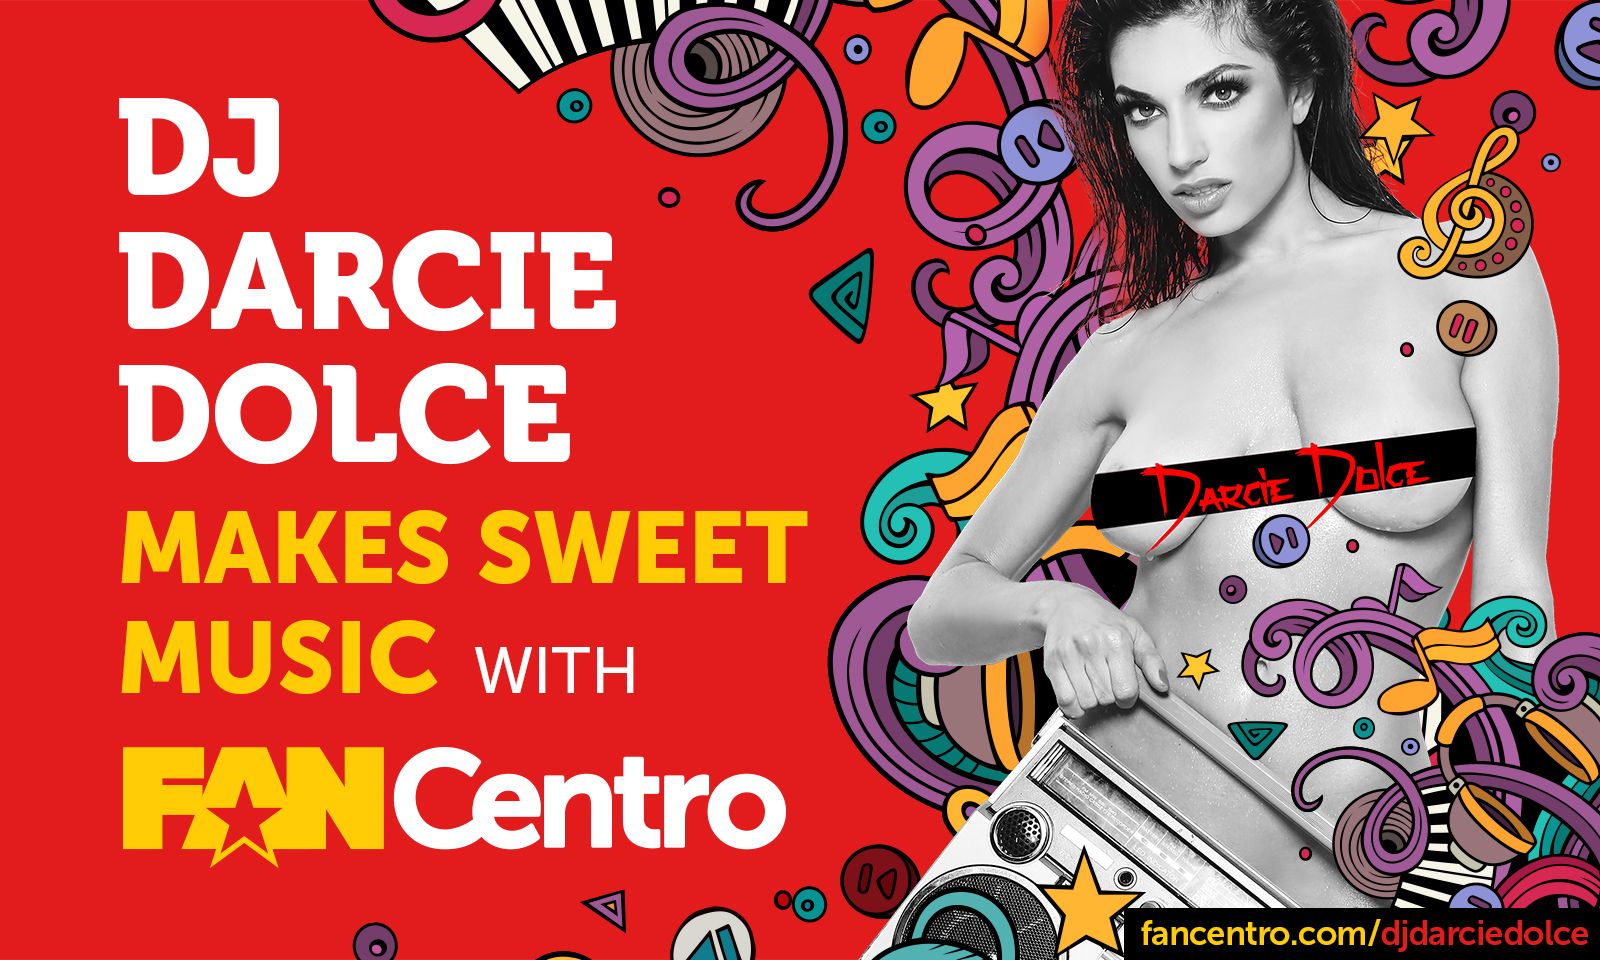 DJ Darcie Dolce Makes Sweet Music with FanCentro